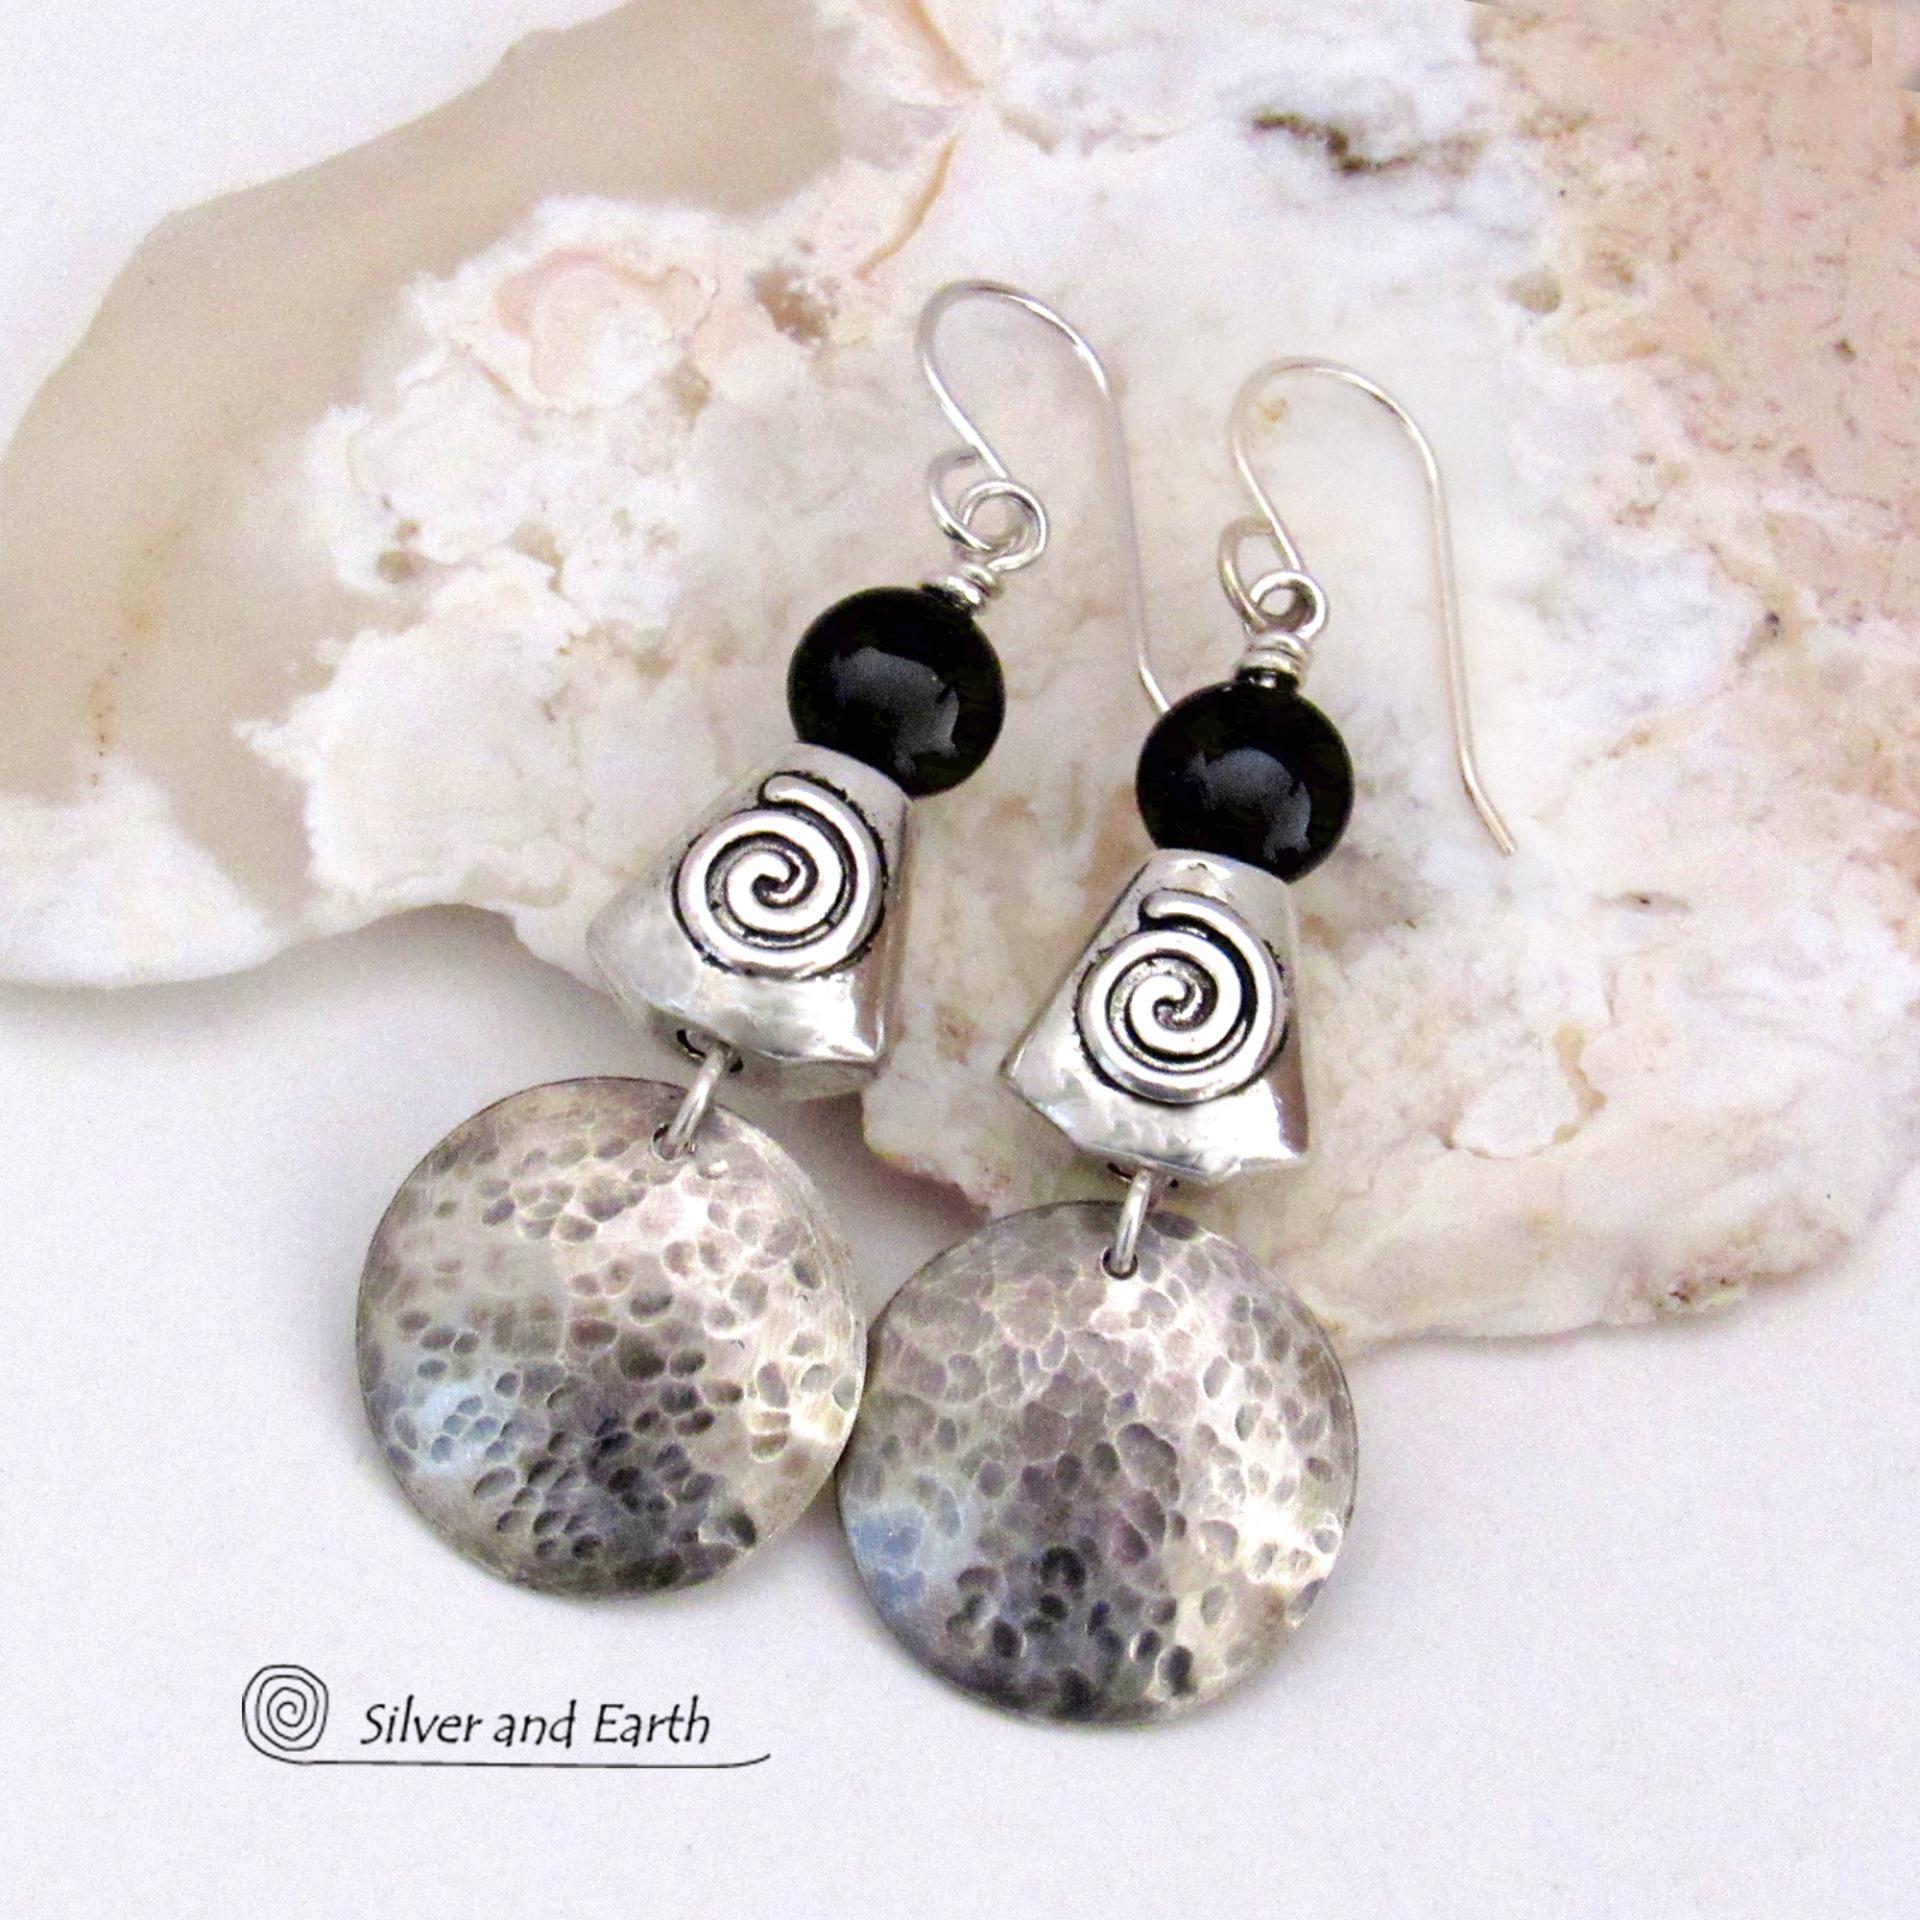 Tagged items: hammered earrings on Folksy